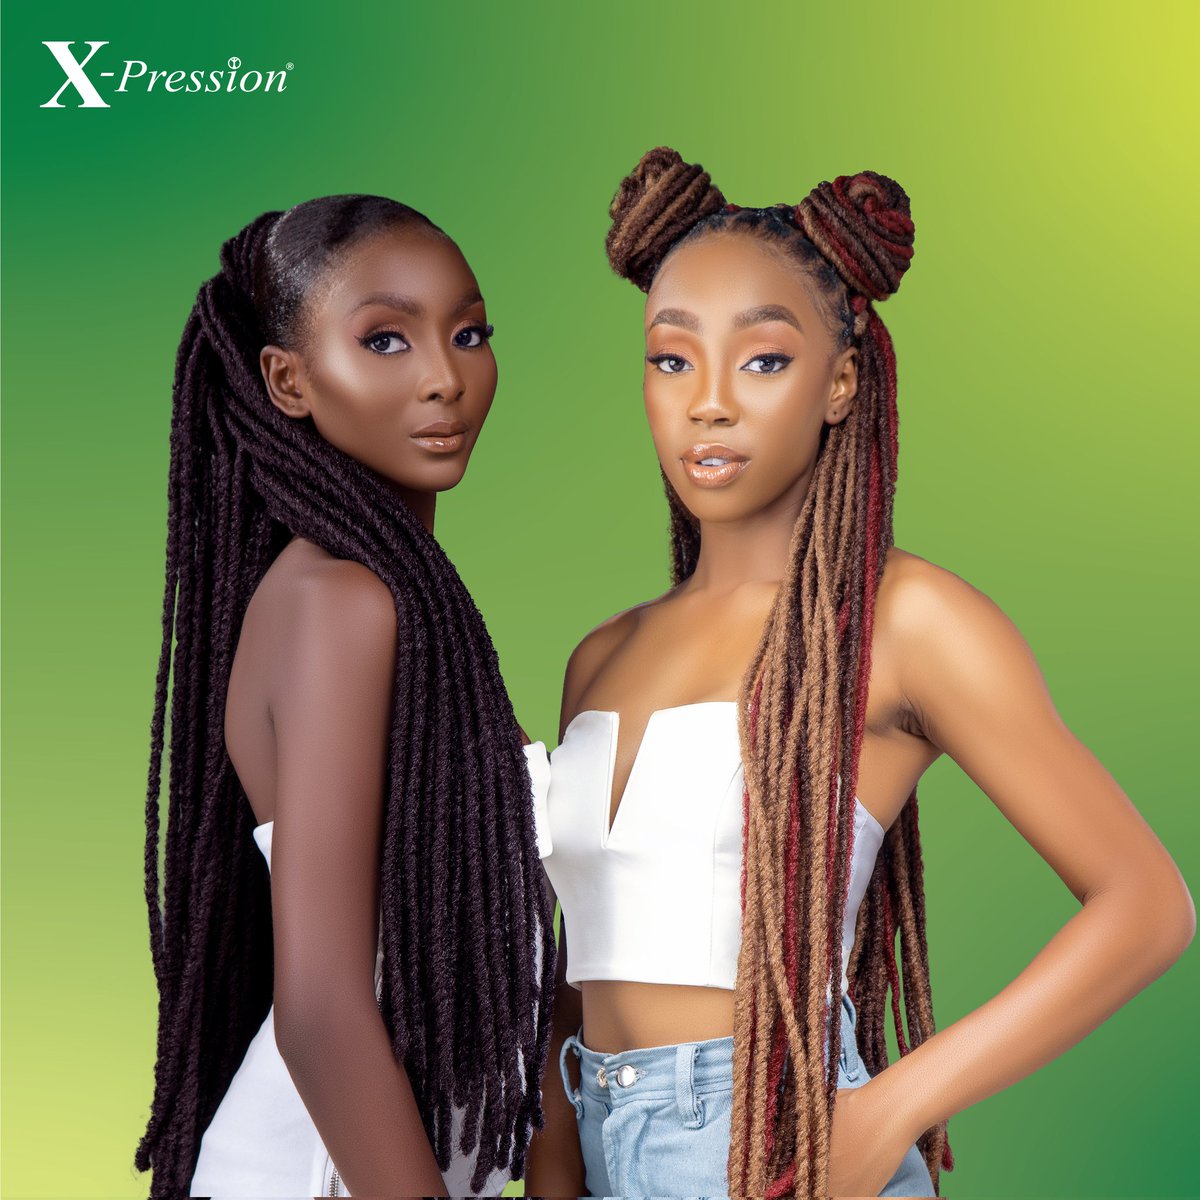 Cheers to the latest addition to our Special Braid collection: Bahama Locs 👏🏾👏🏾👏🏾 The secret to looking effortlessly elegant all weekend. Be extraordinary, be confident, be stunning 💯 #xp4you #xpression #BahamaLocs #bahama #newproduct #weekend #xpression